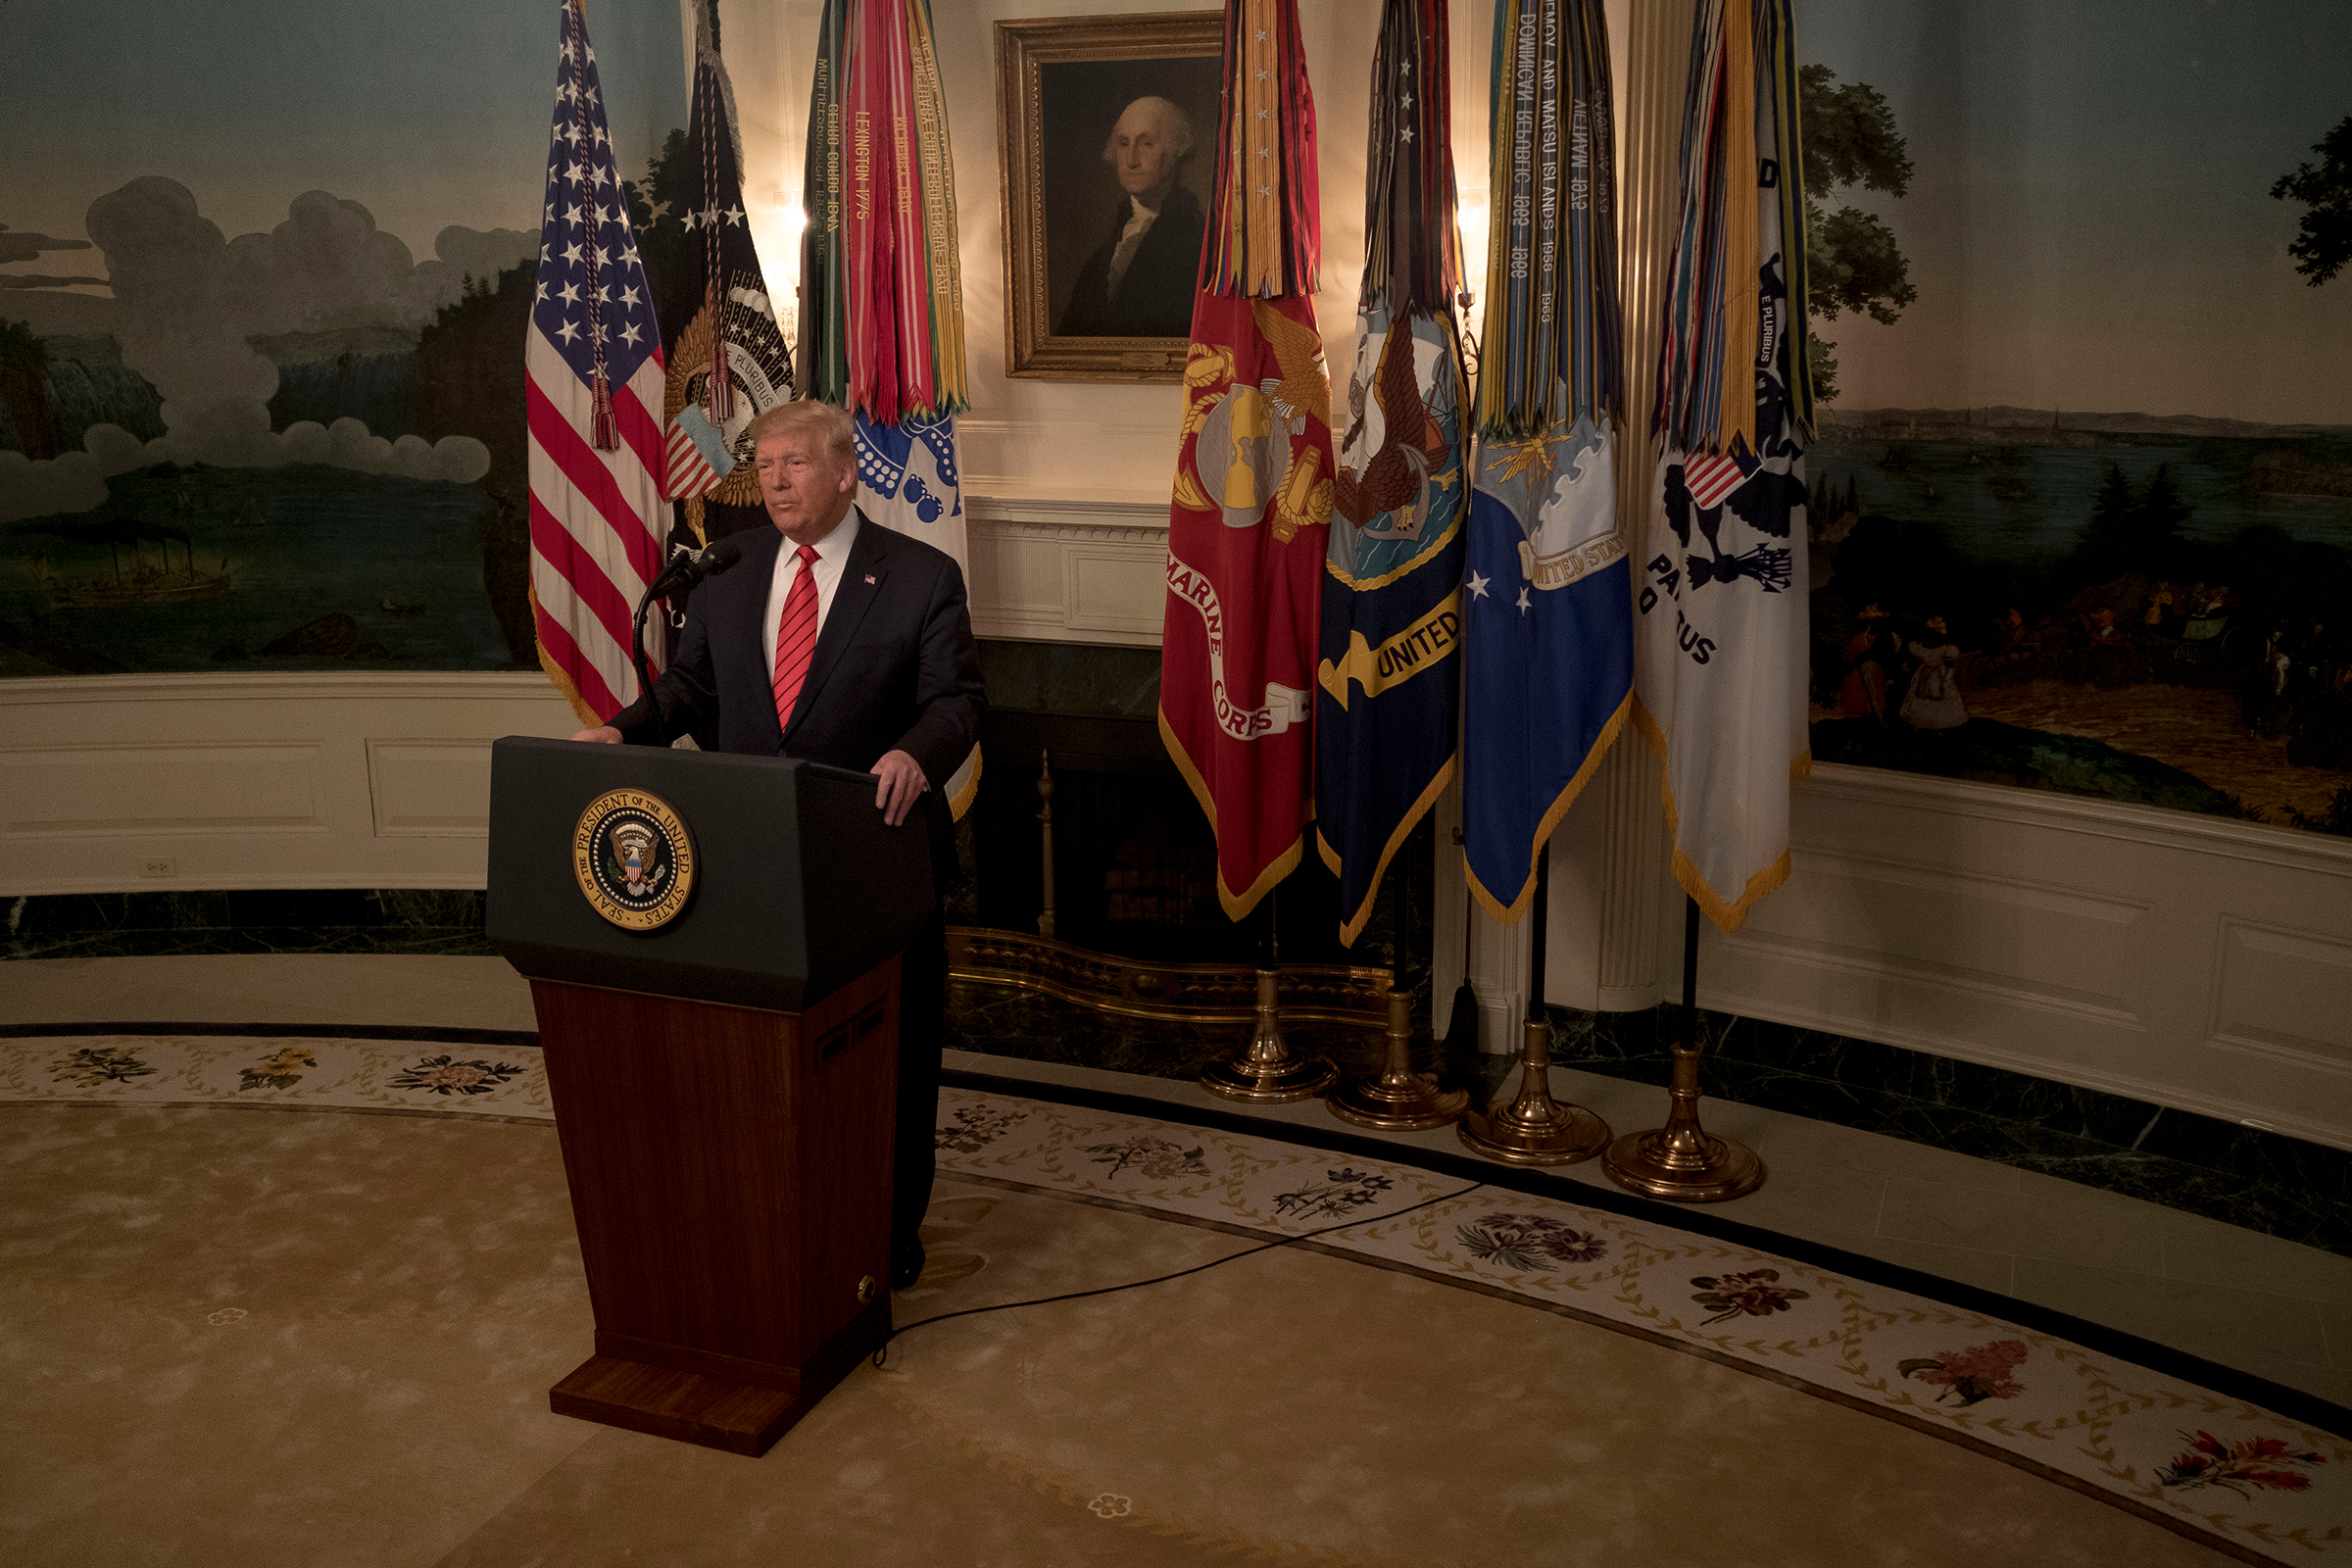 President Donald Trump announces the death of ISIS leader Abu Bakr al-Baghdadi, in a raid by American special operations forces in Syria, in remarks at the White House in Washington, D.C., on Oct. 27, 2019. (Gabriella Demczuk for TIME)